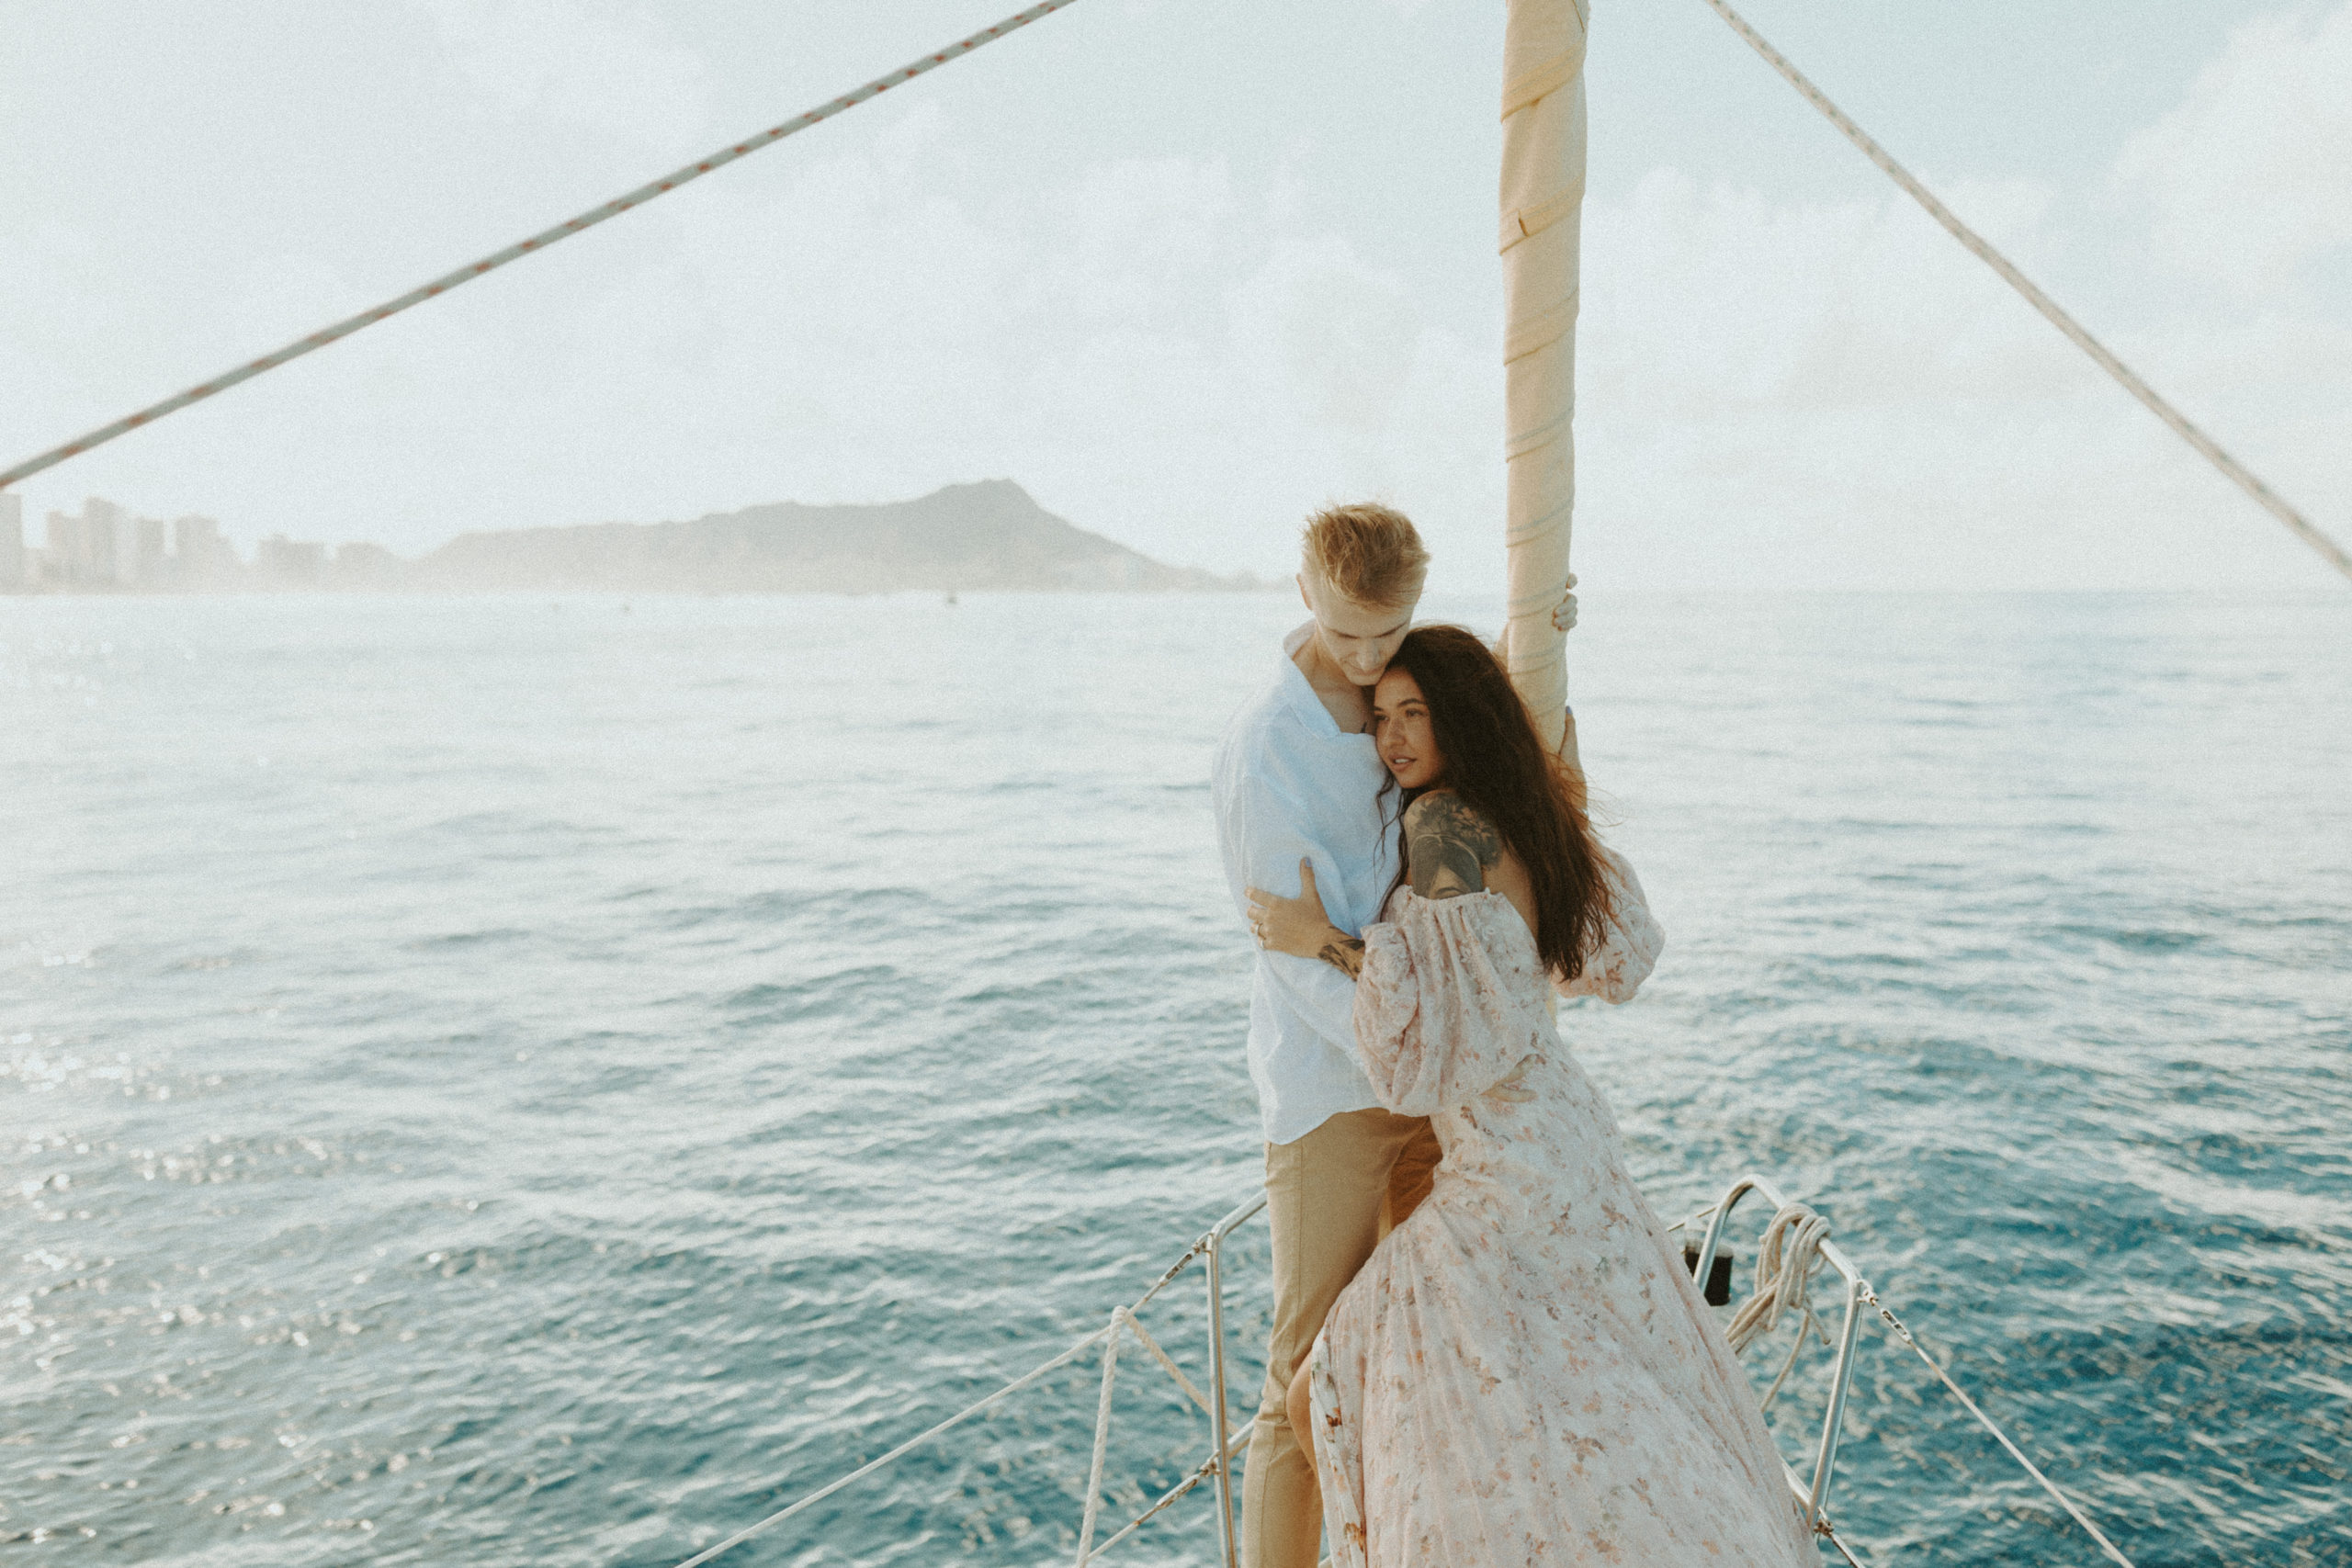 the couple on the sailboat together in Hawaii